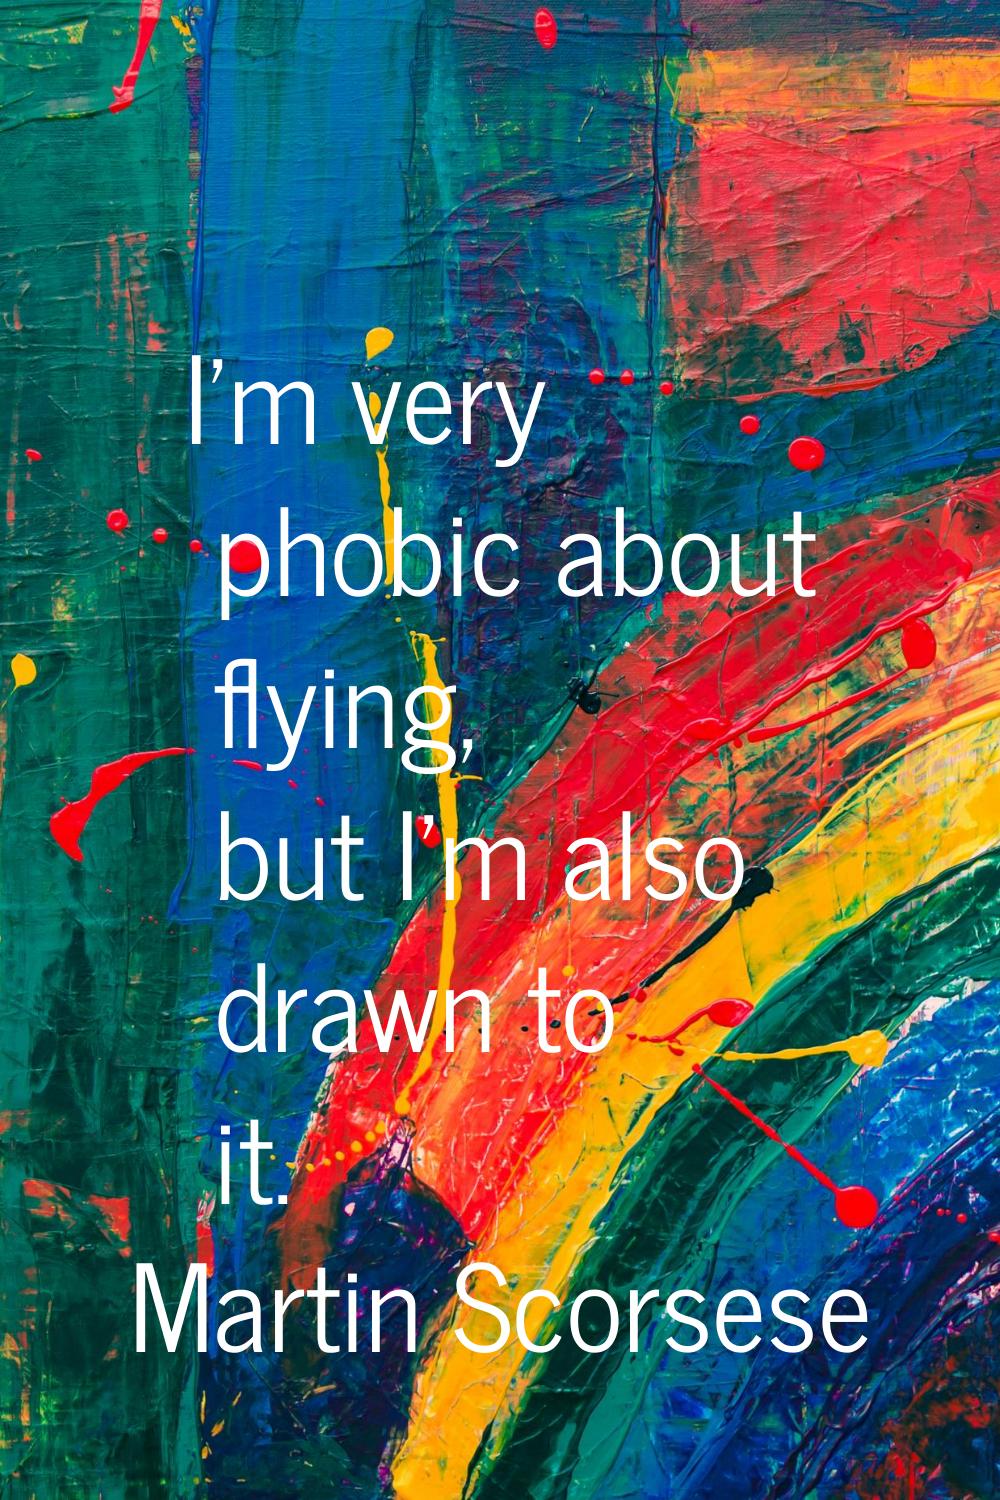 I'm very phobic about flying, but I'm also drawn to it.